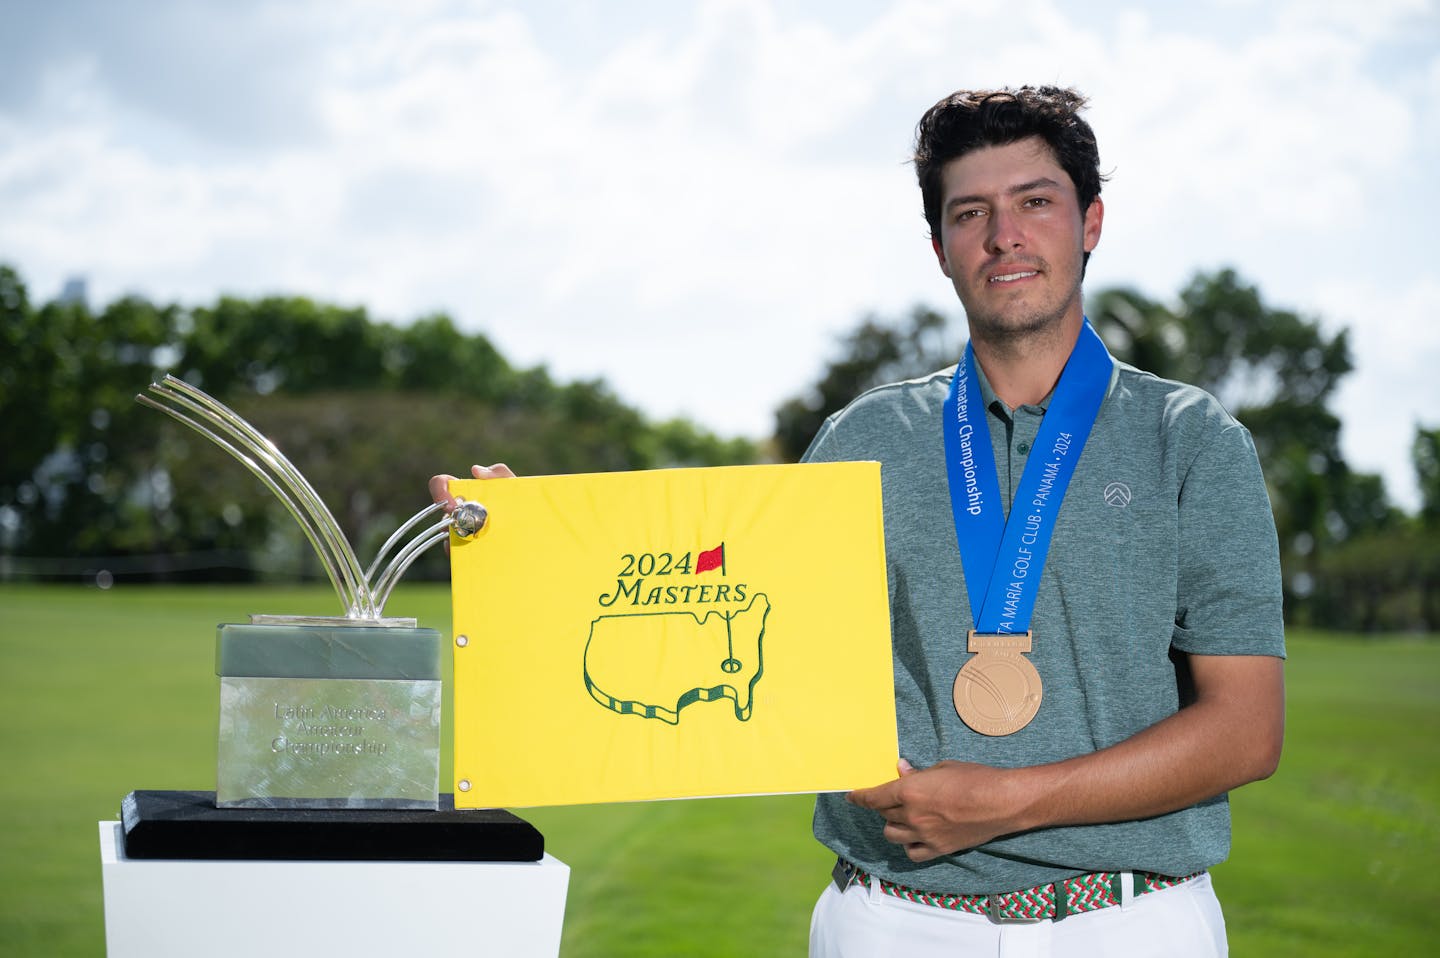 Santiago De la Fuente of Mexico poses with the LAAC Trophy and a Masters flag after winning the 2024 LAAC.